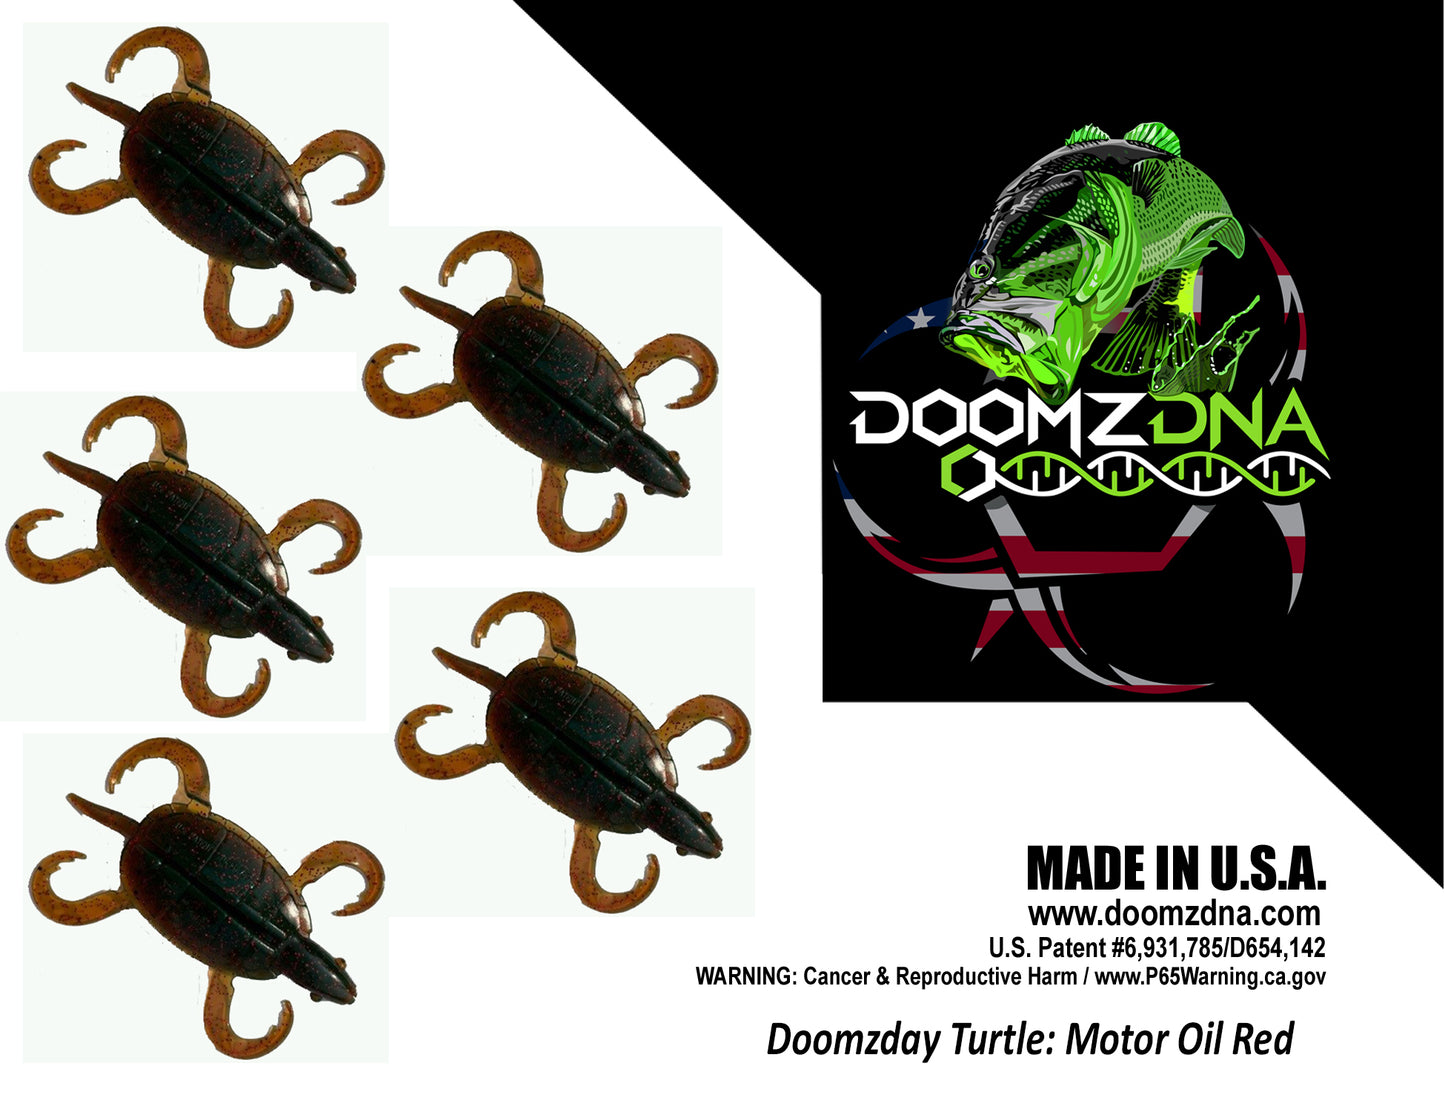 DDT3-Motor Oil Red Flake Doomzday Turtle - Doomz Day Bass Turtle Lures